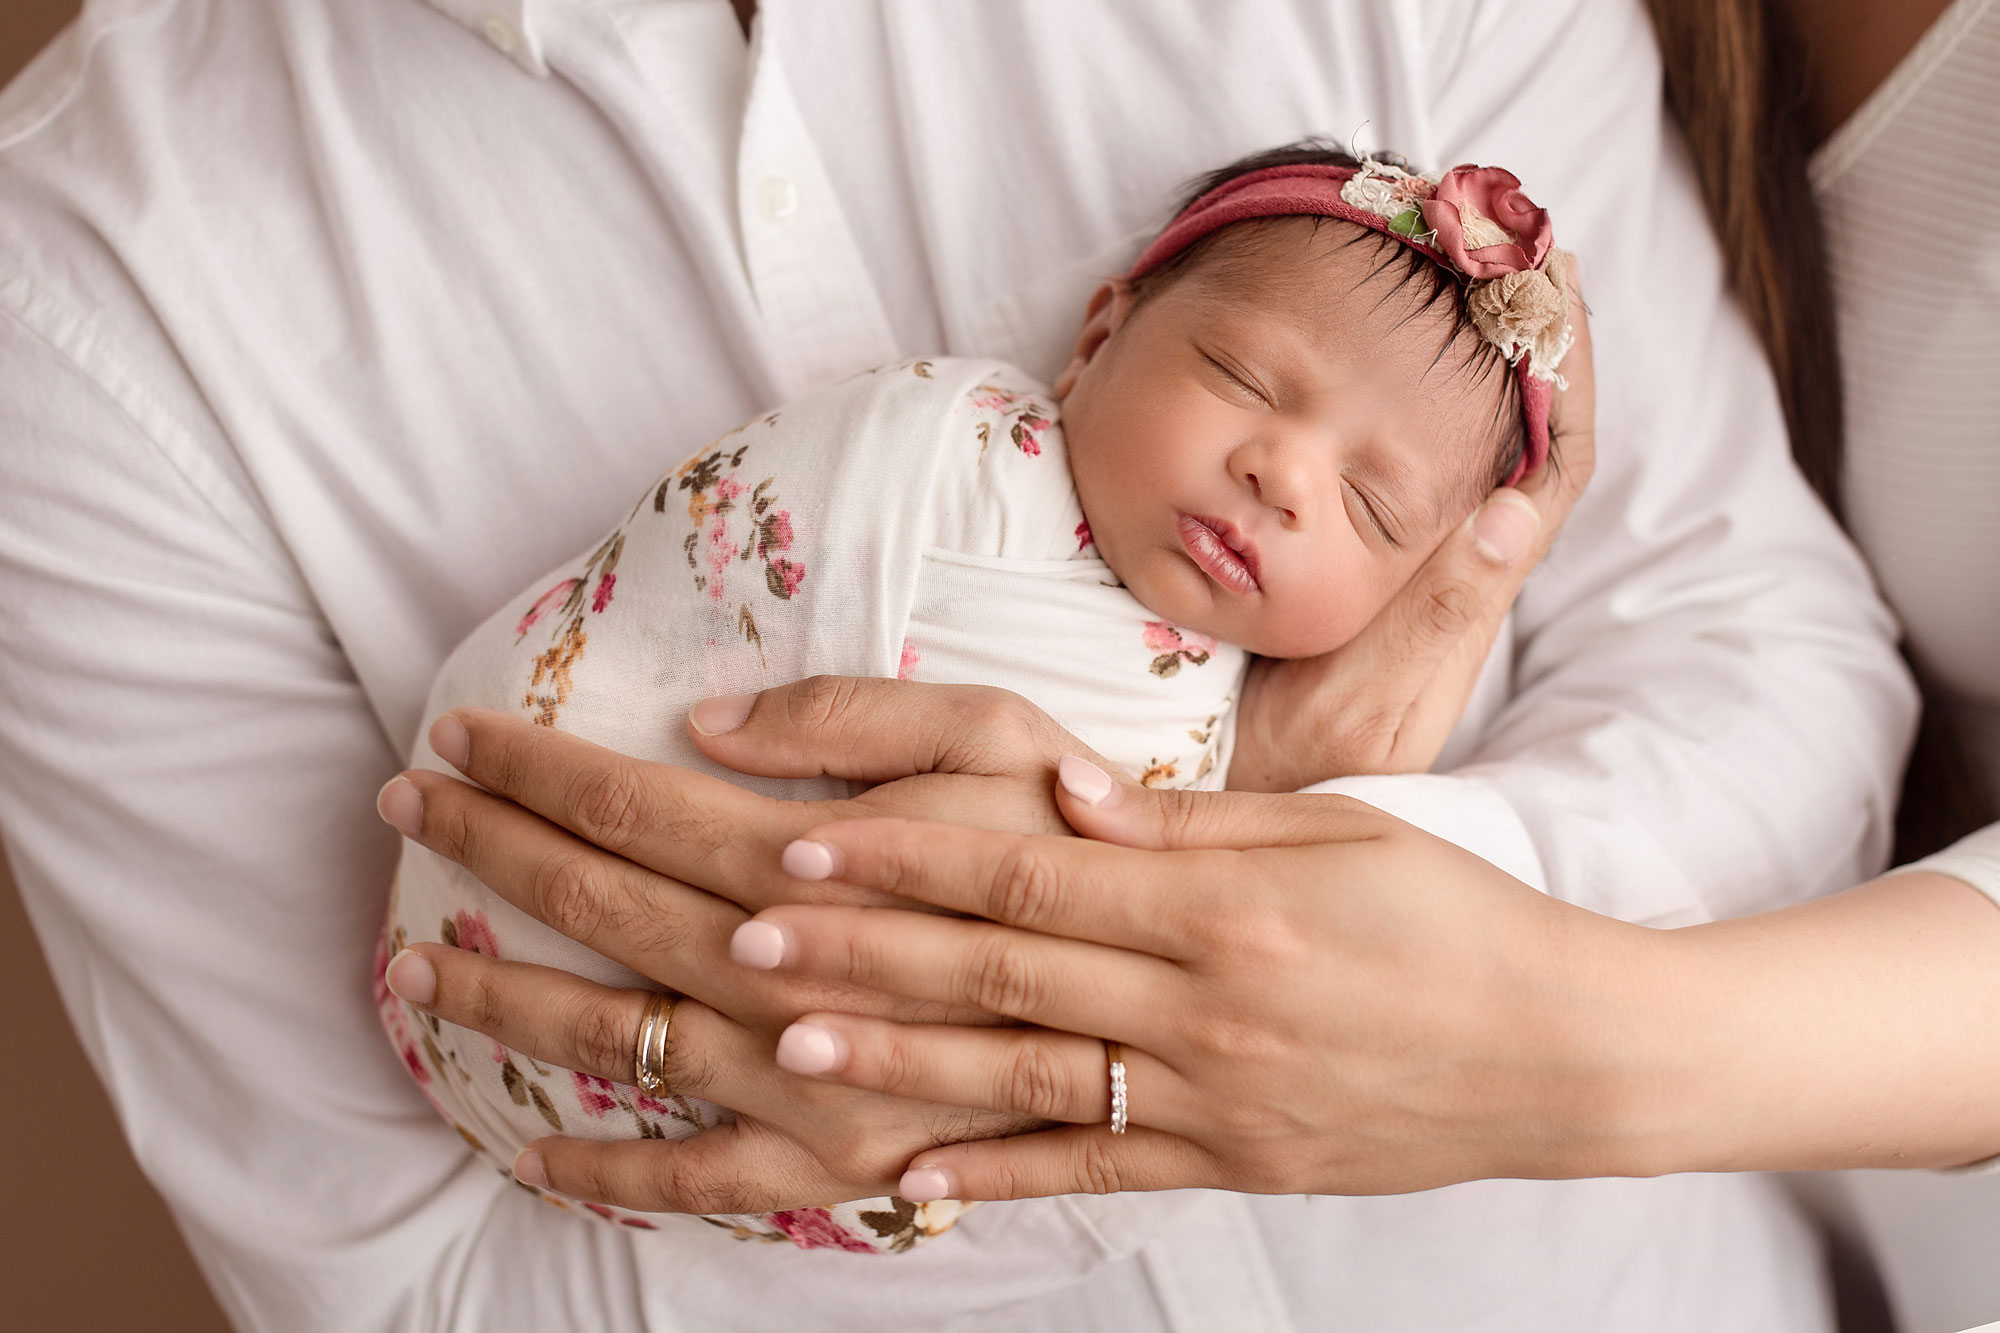 professional baby pictures nj, baby girl in floral wrap sleeping in parents' arms